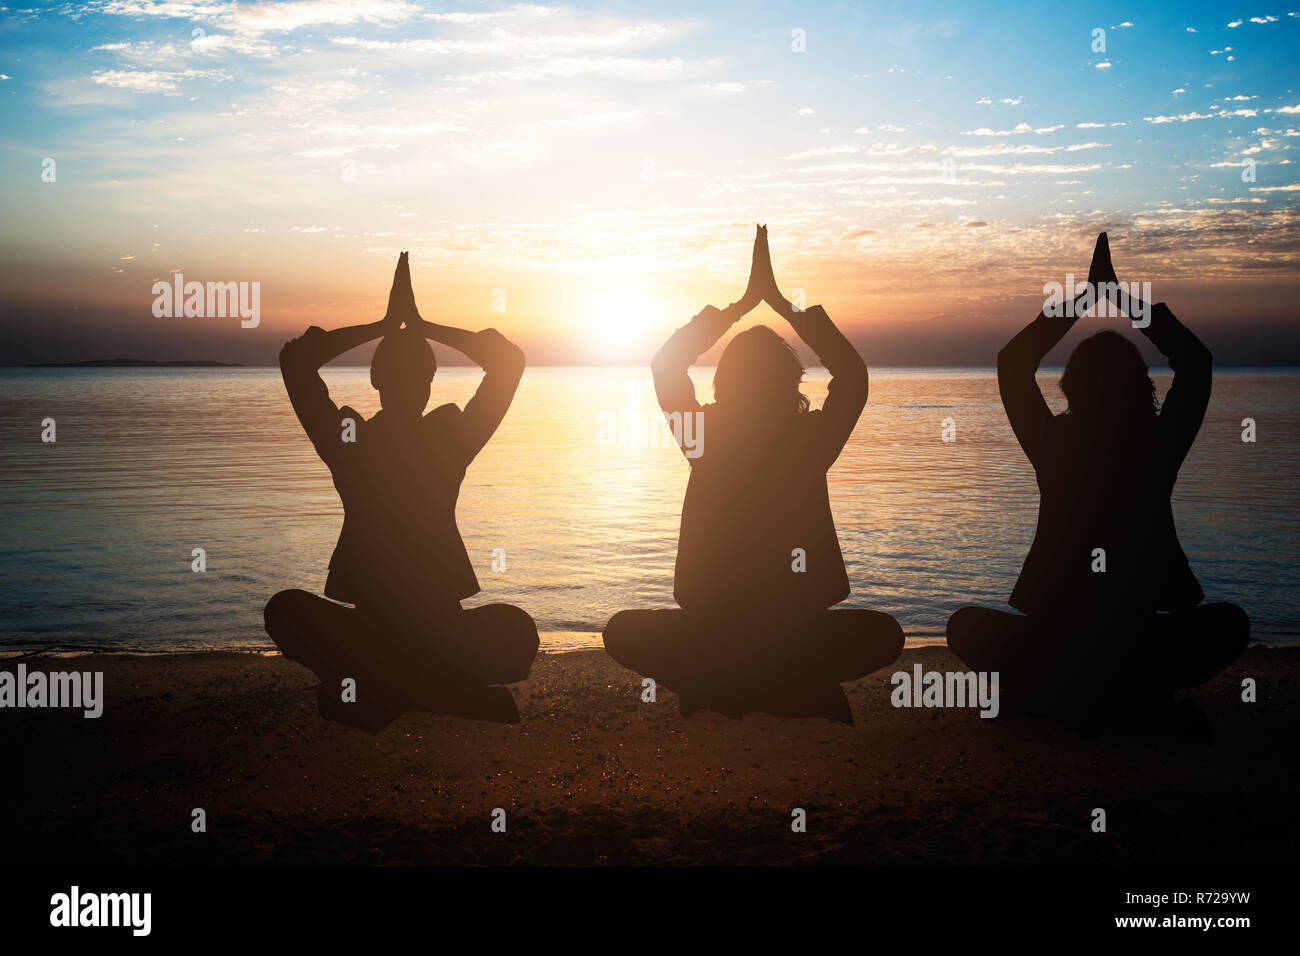 Silhouette Of People Meditating At Beach During Sunset Stock Photo